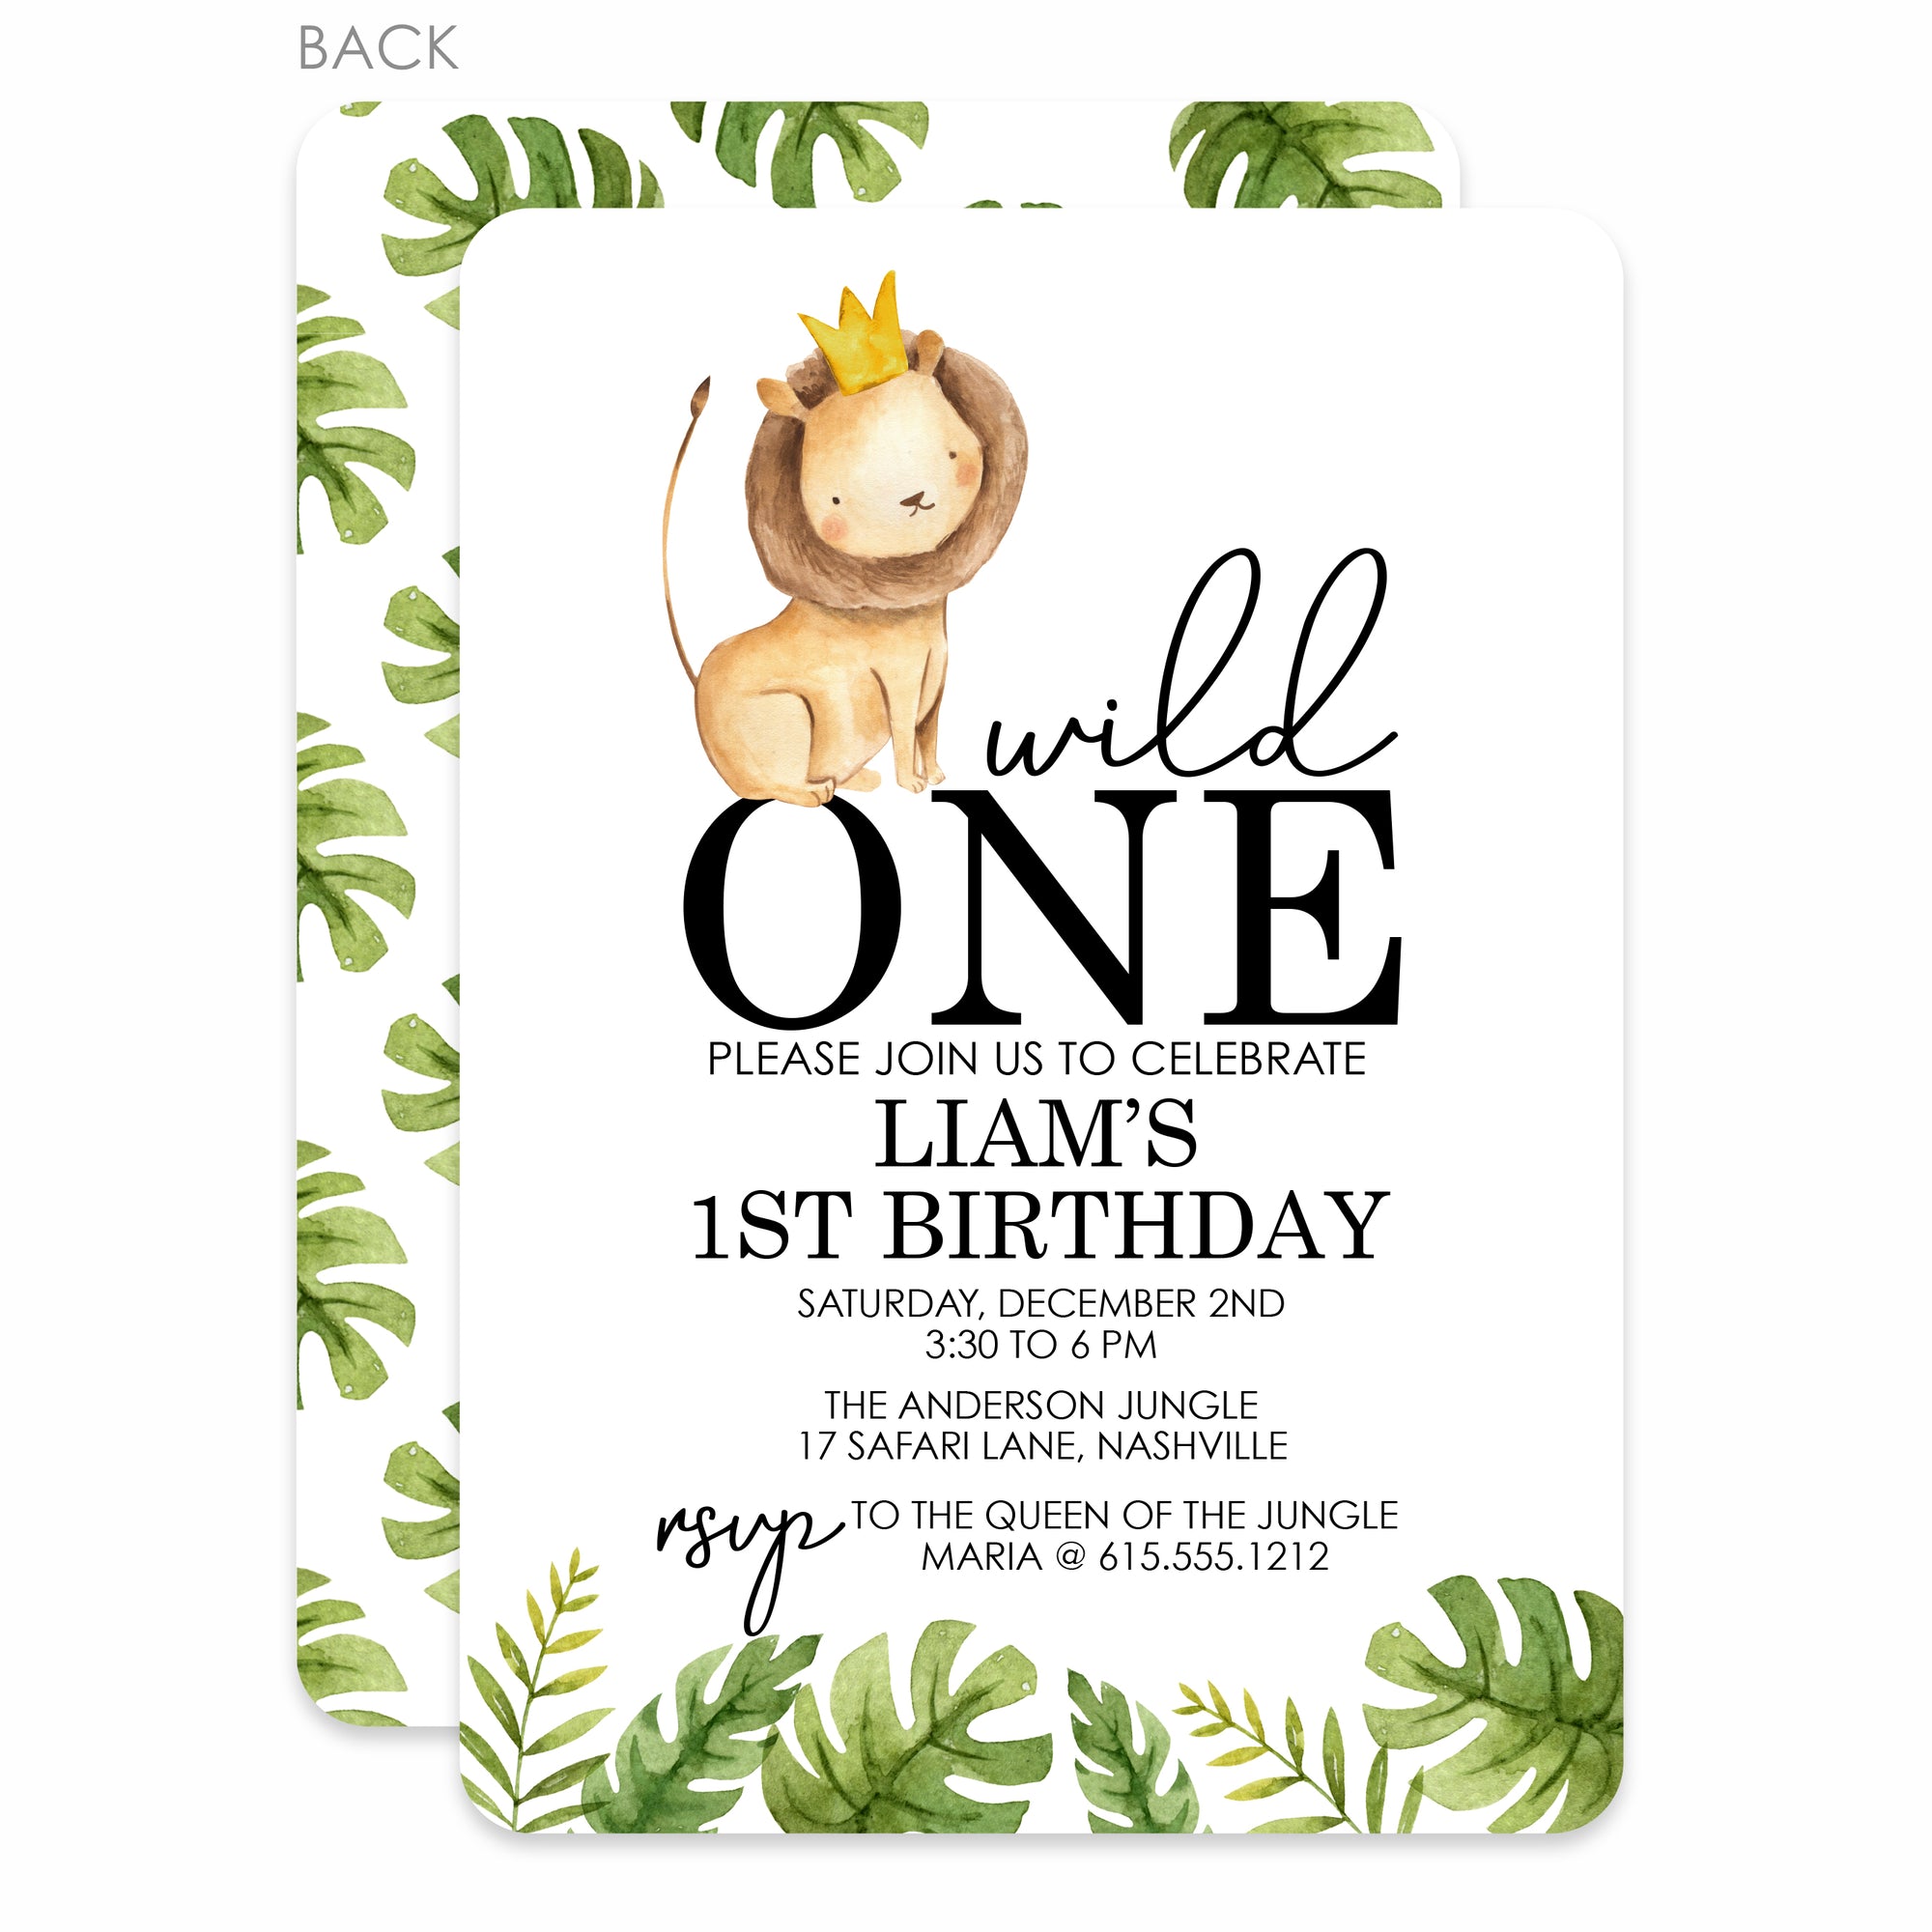 Wild ONE first birthday invitations, printed on thick cardstock, two sided printing, rounded corners, includes envelopes